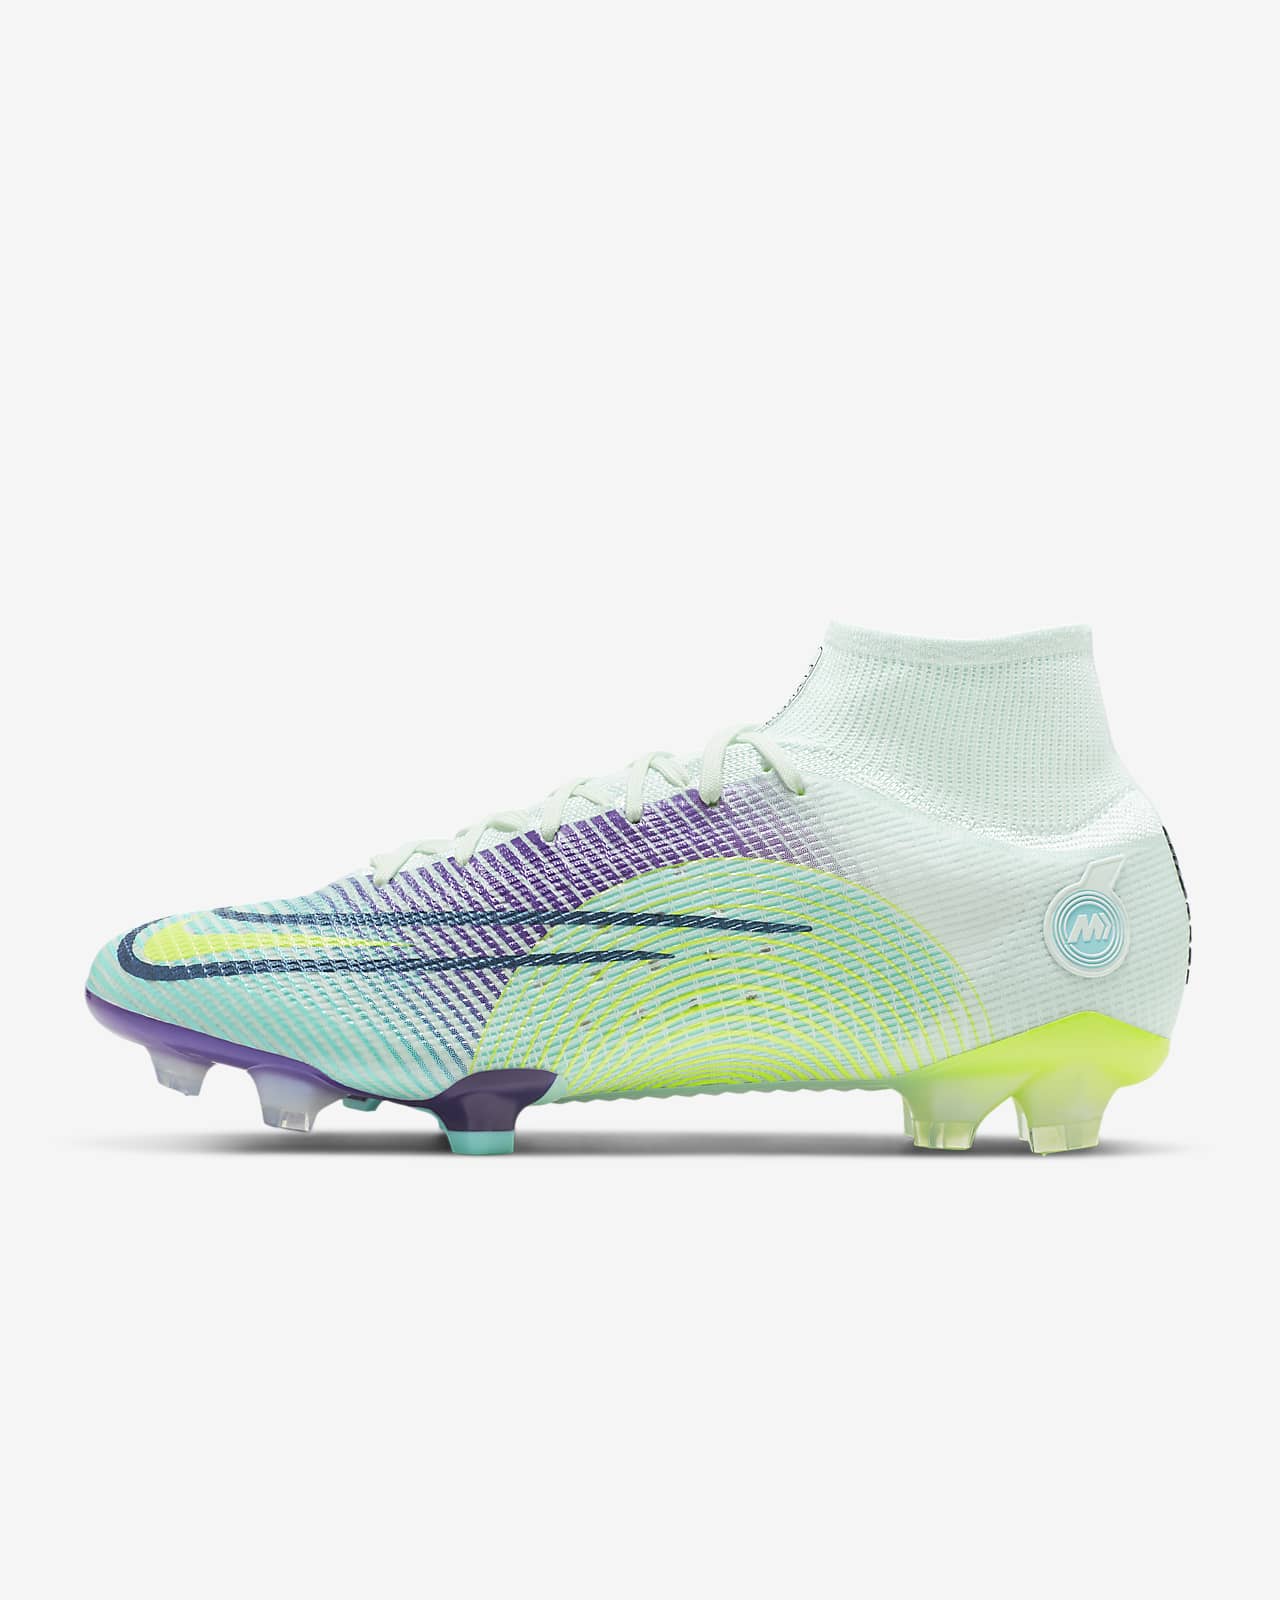 Nike Mercurial Dream Speed Superfly 8 Elite FG Firm-Ground Soccer Cleats